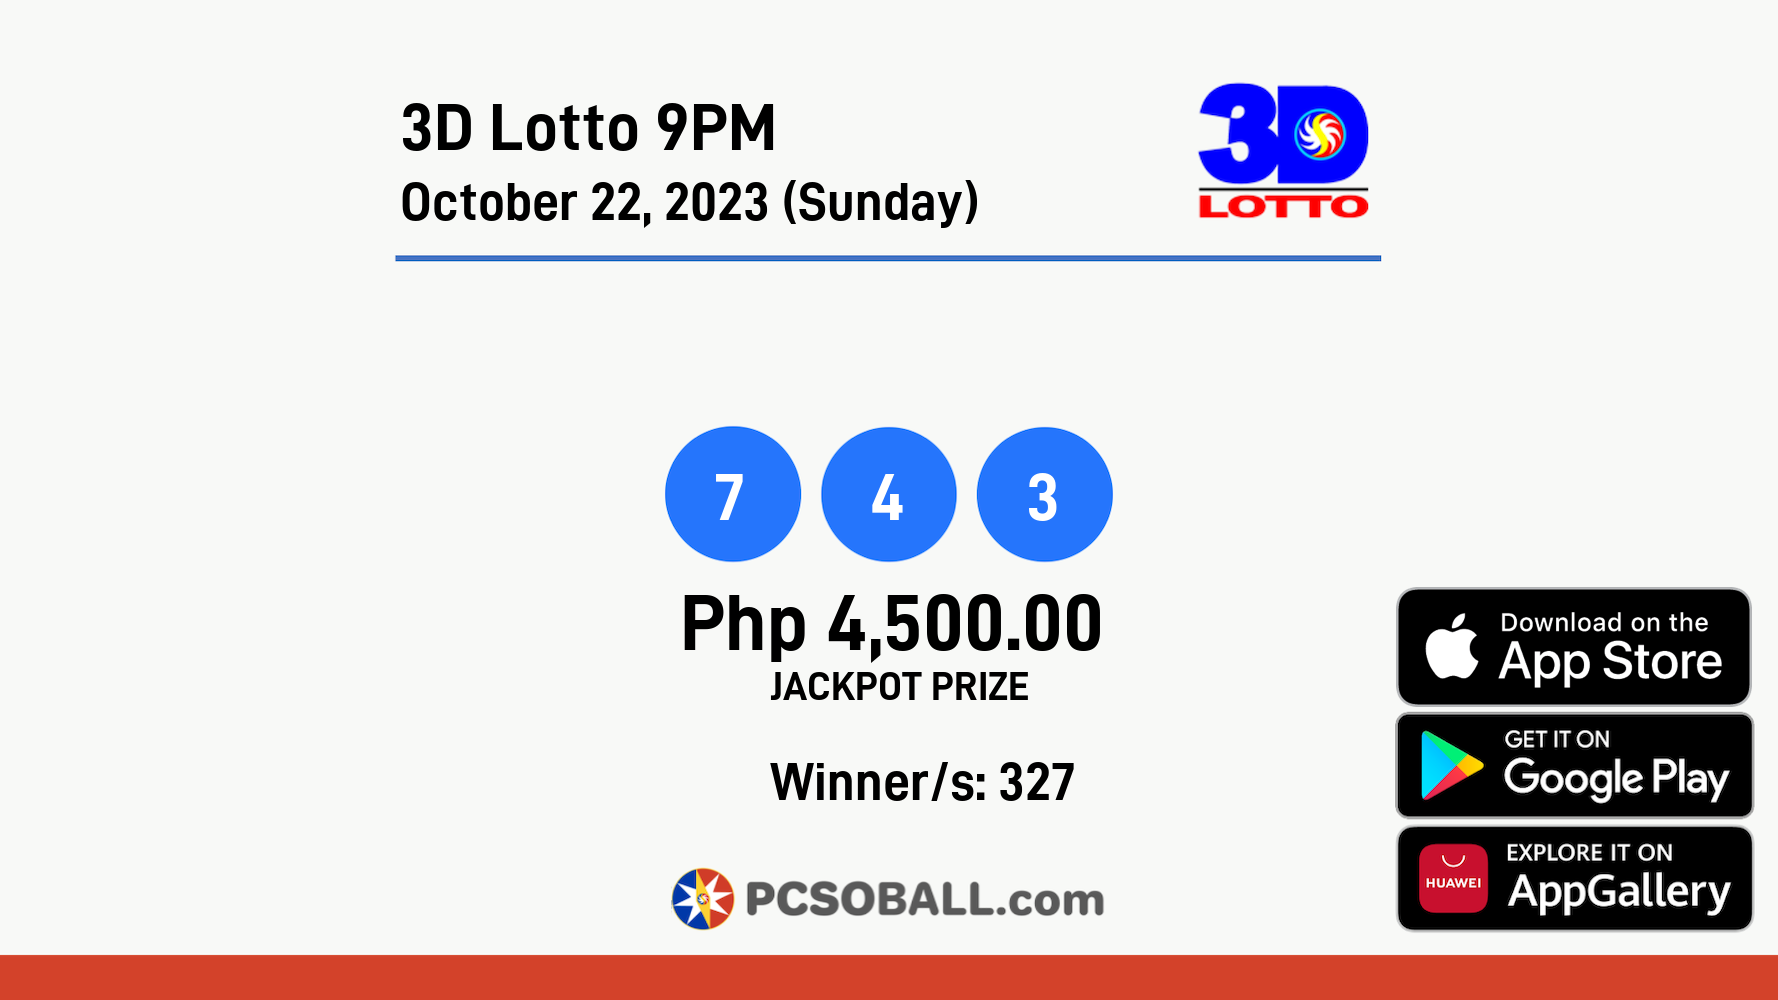 3D Lotto 9PM October 22, 2023 (Sunday) Result